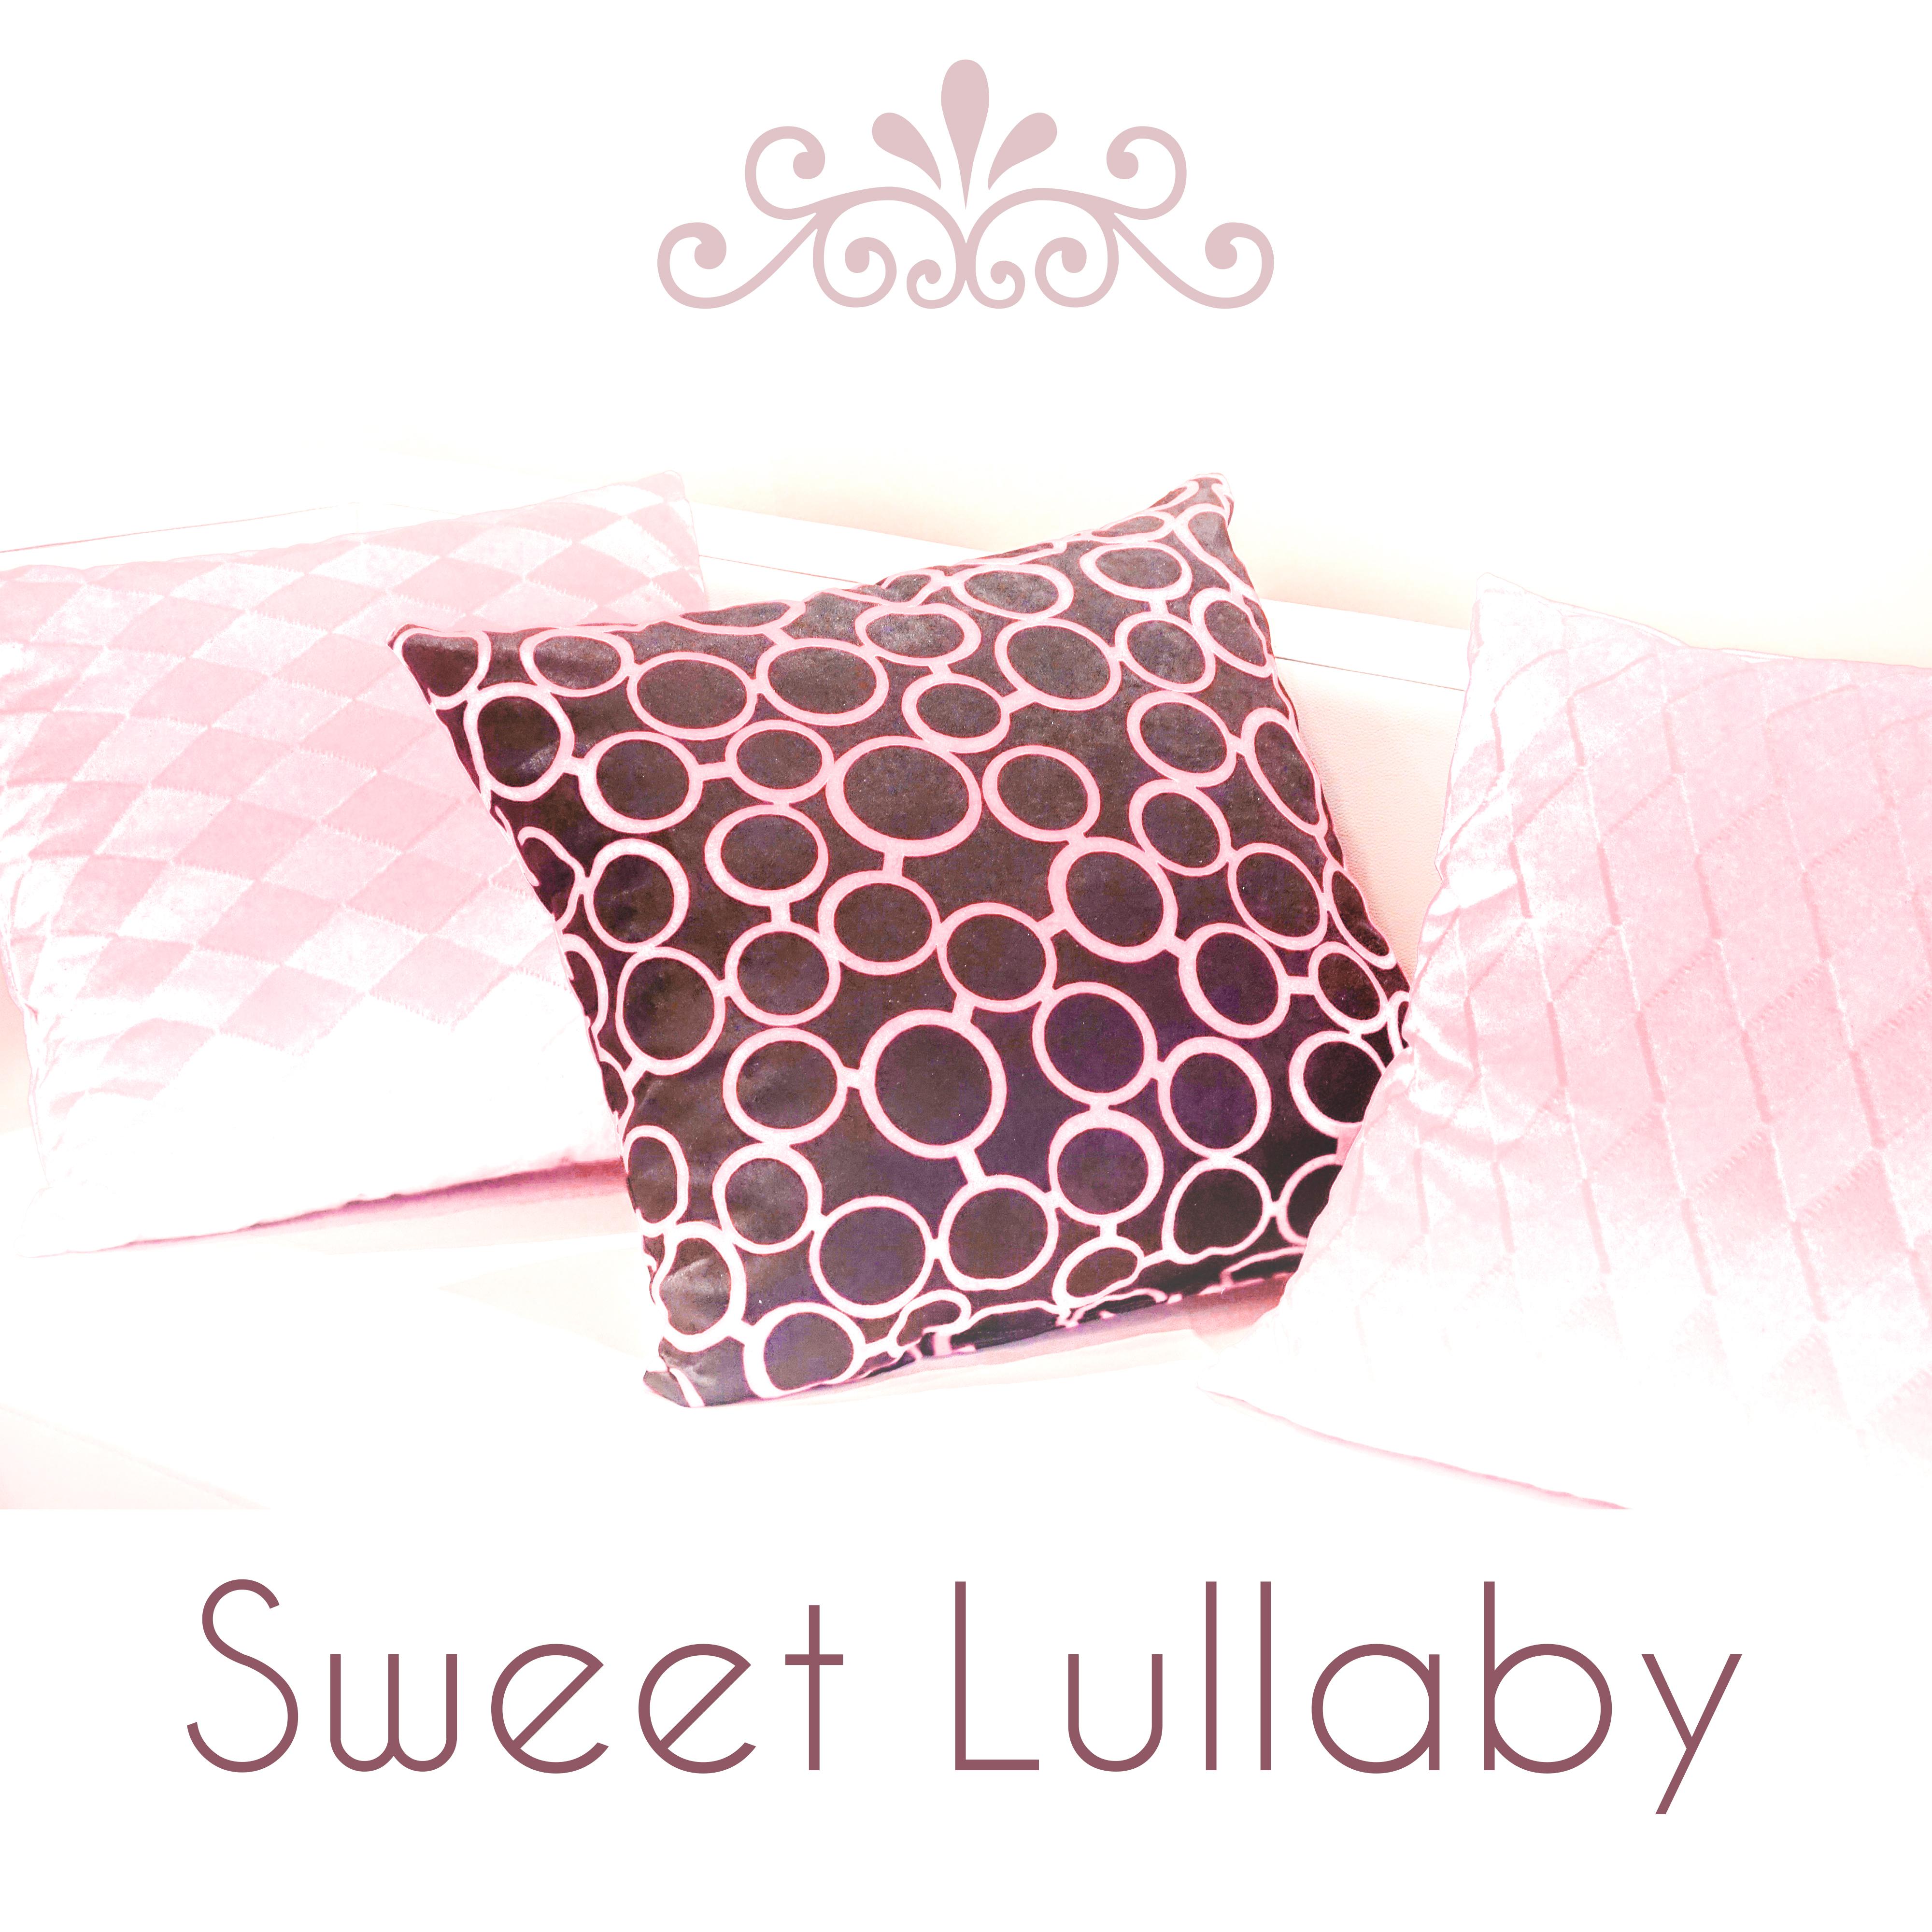 Sweet Lullaby – Jazz for Sleep, Healing Music to Bed, Deep Dreams, Soothing Jazz, Night Sounds, Relaxing Jazz at Night